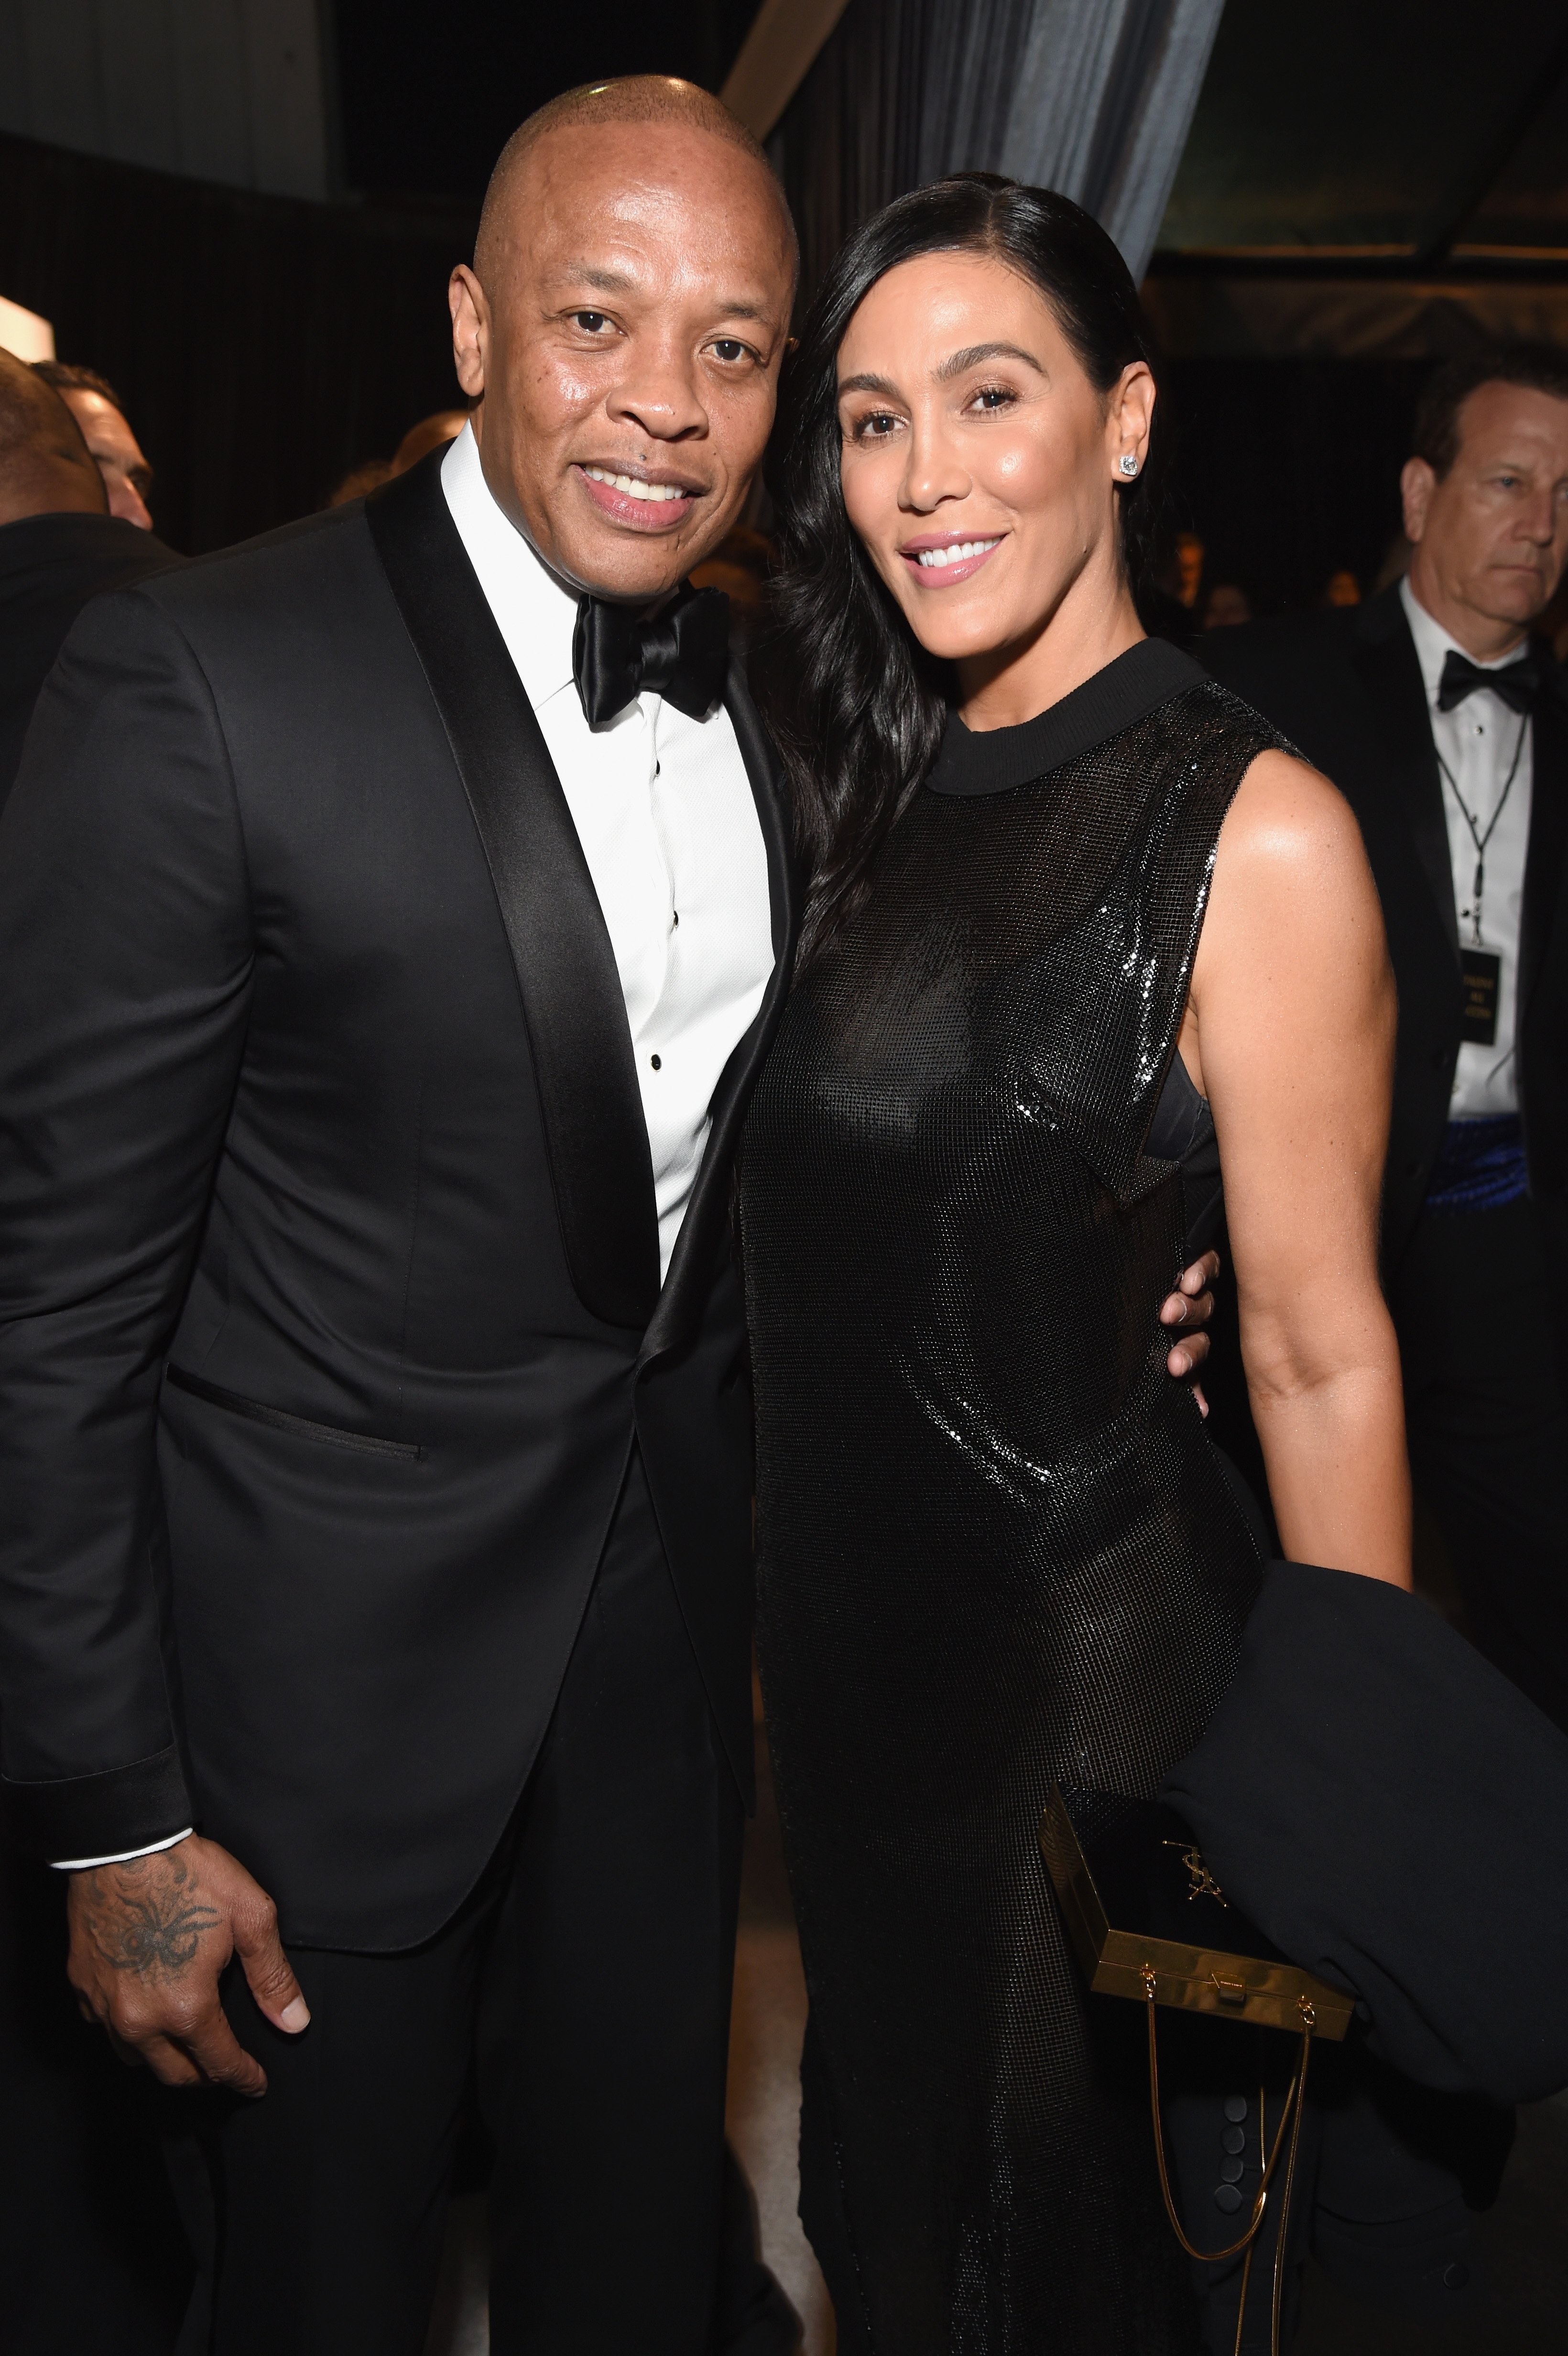 Dr. Dre and wife, Nicole Young during better times at the City of Hope Spirit of Life Gala on October 11, 2018 in Santa Monica. | Source: Getty Images.